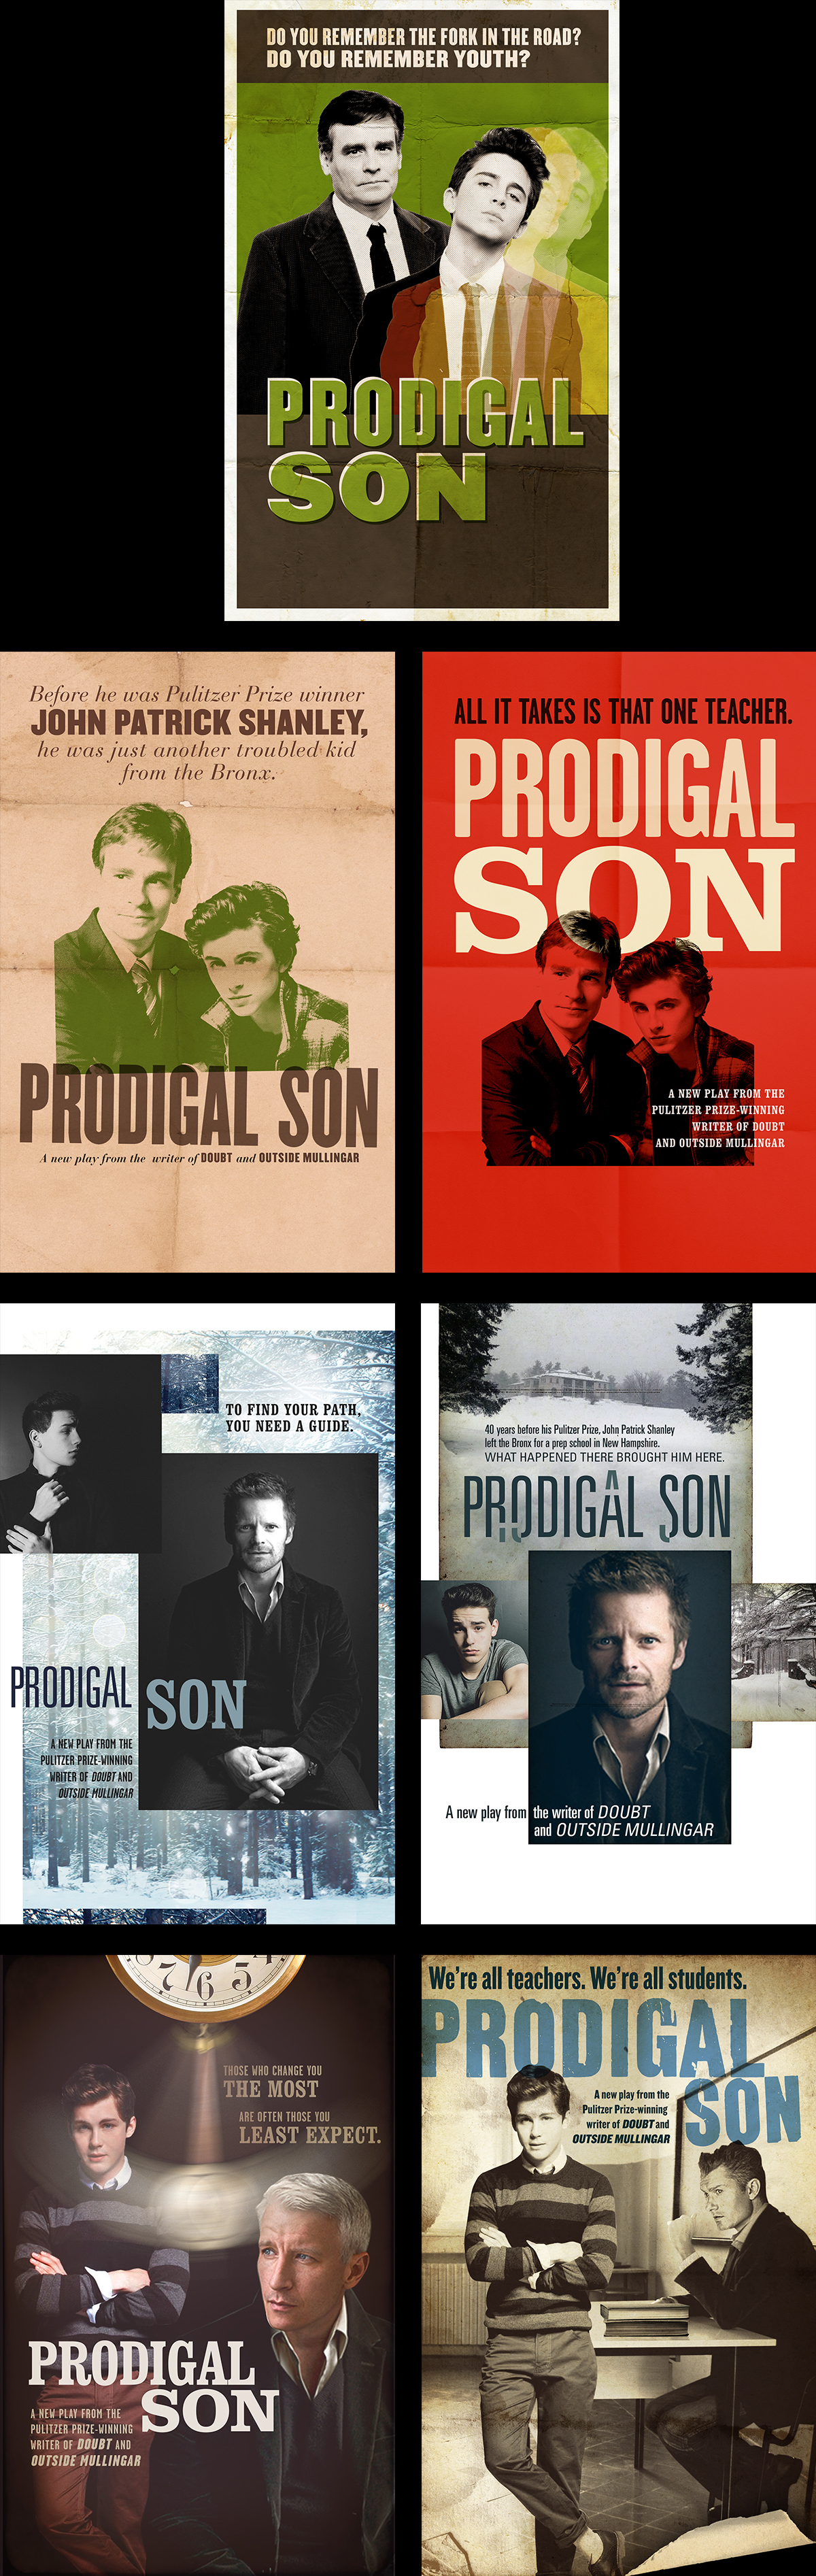 broadway theater  Prodigal Son Retro vintage play off broadway